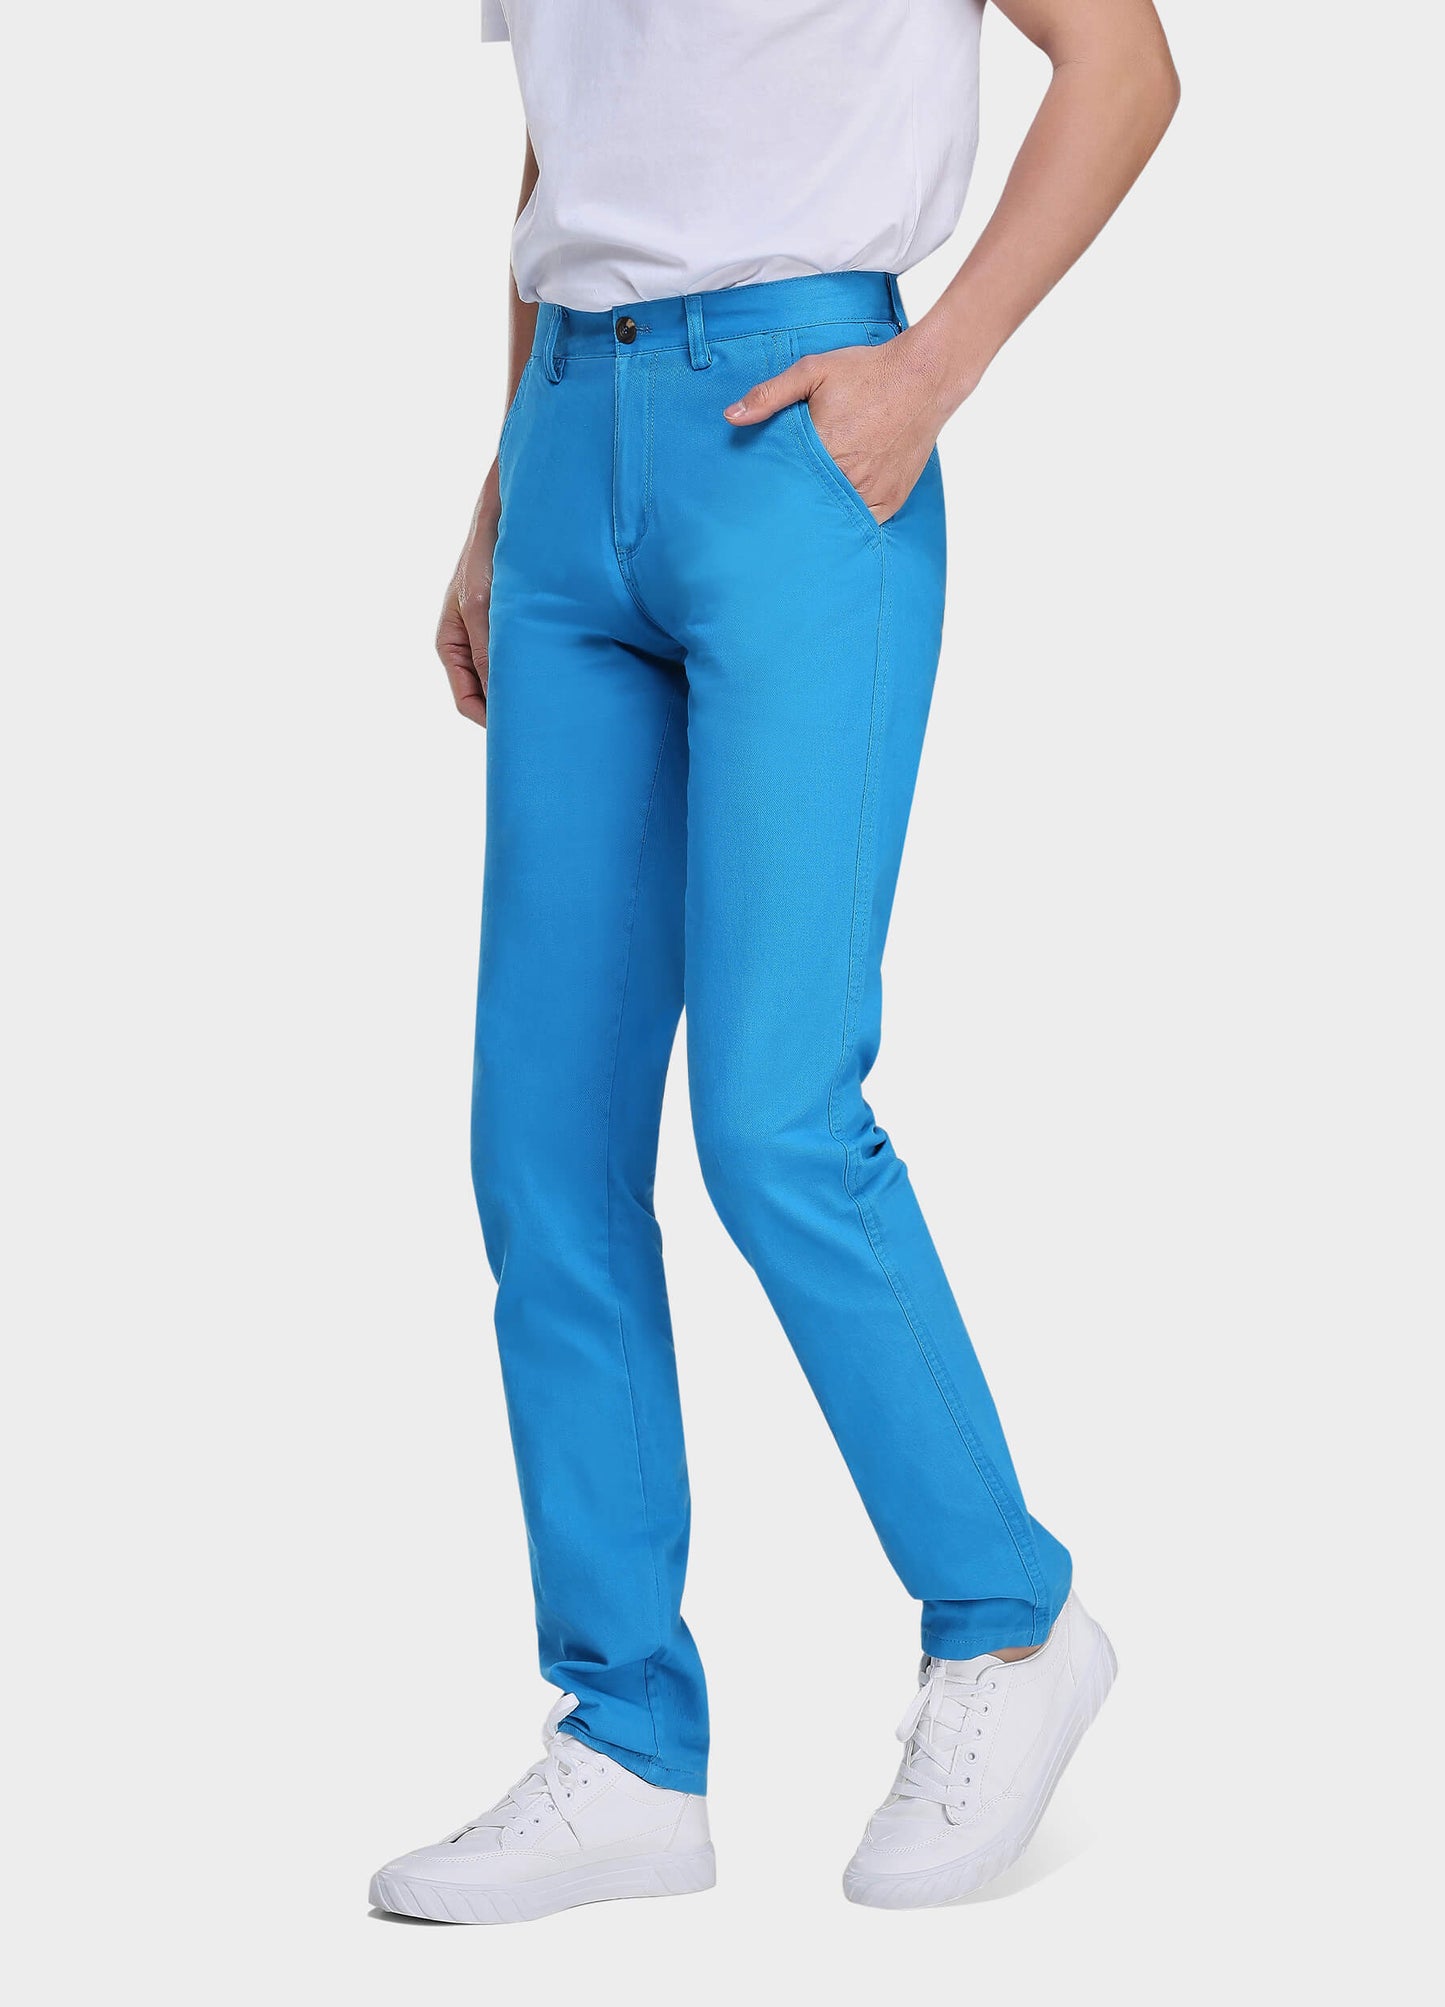 1PA1 Men's Fall Straight Leg Zip Fly Button Closure Slant Pocket Casual Trousers-Blue